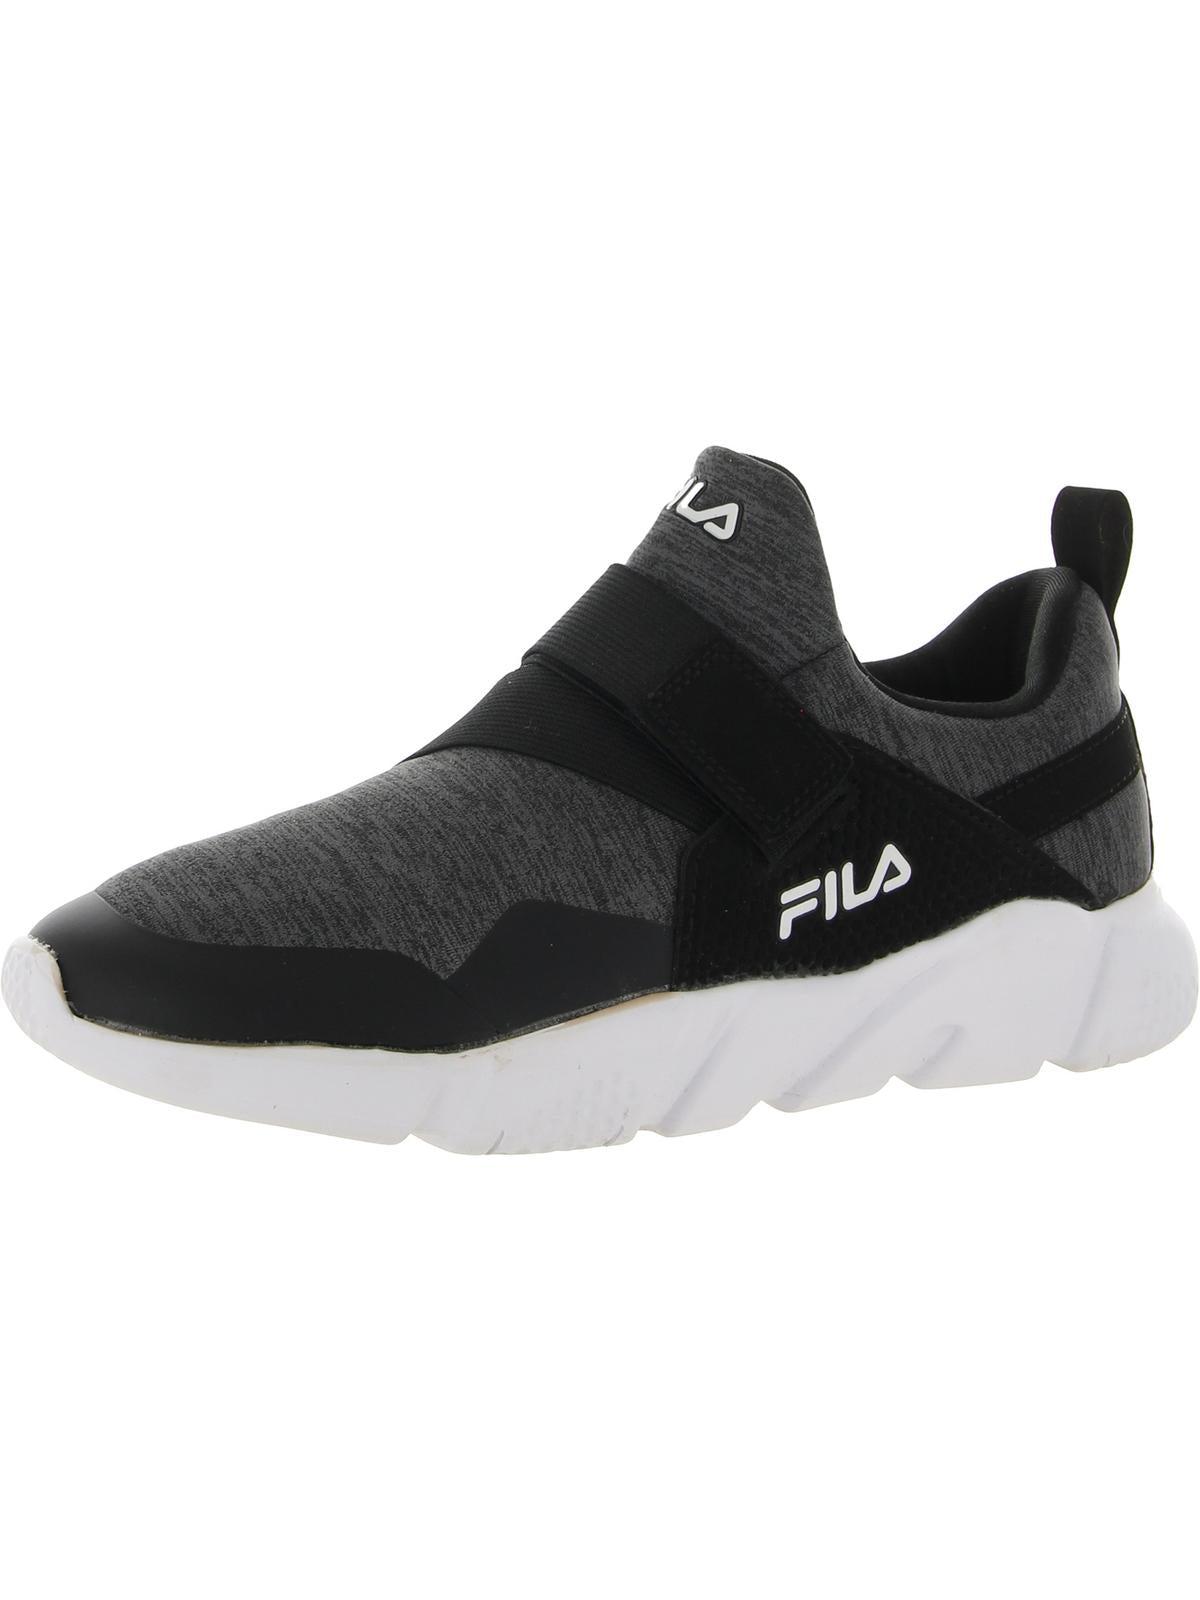 Fila Classico 18 Faux Leather Performance Sneakers in Black | Lyst